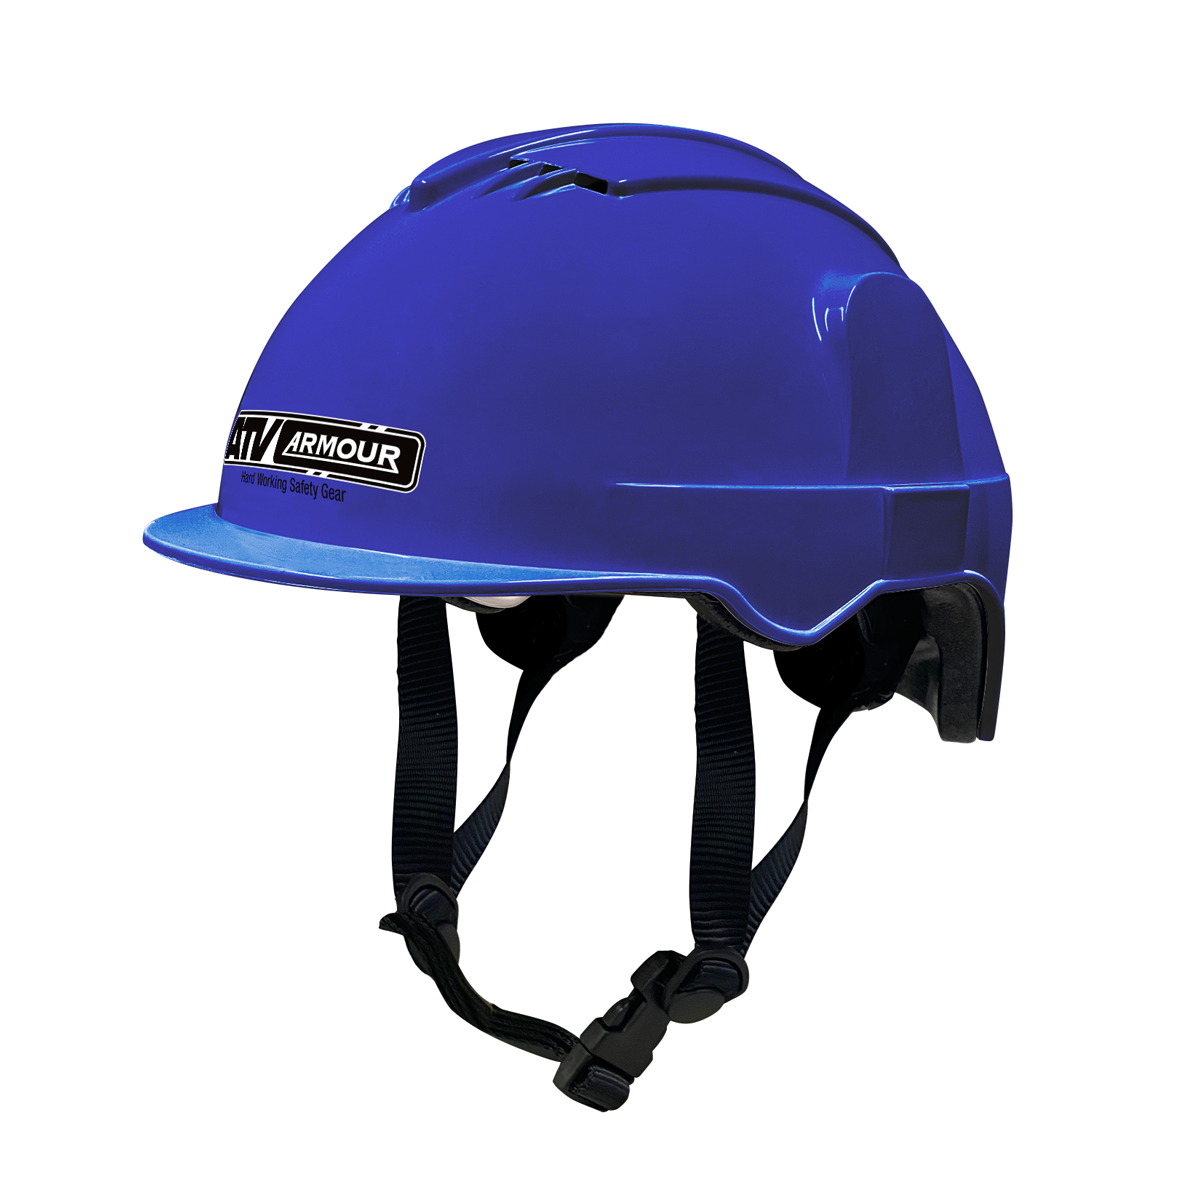 Armour Safety Products Ltd. - Armour Agriculture Safety Helmet